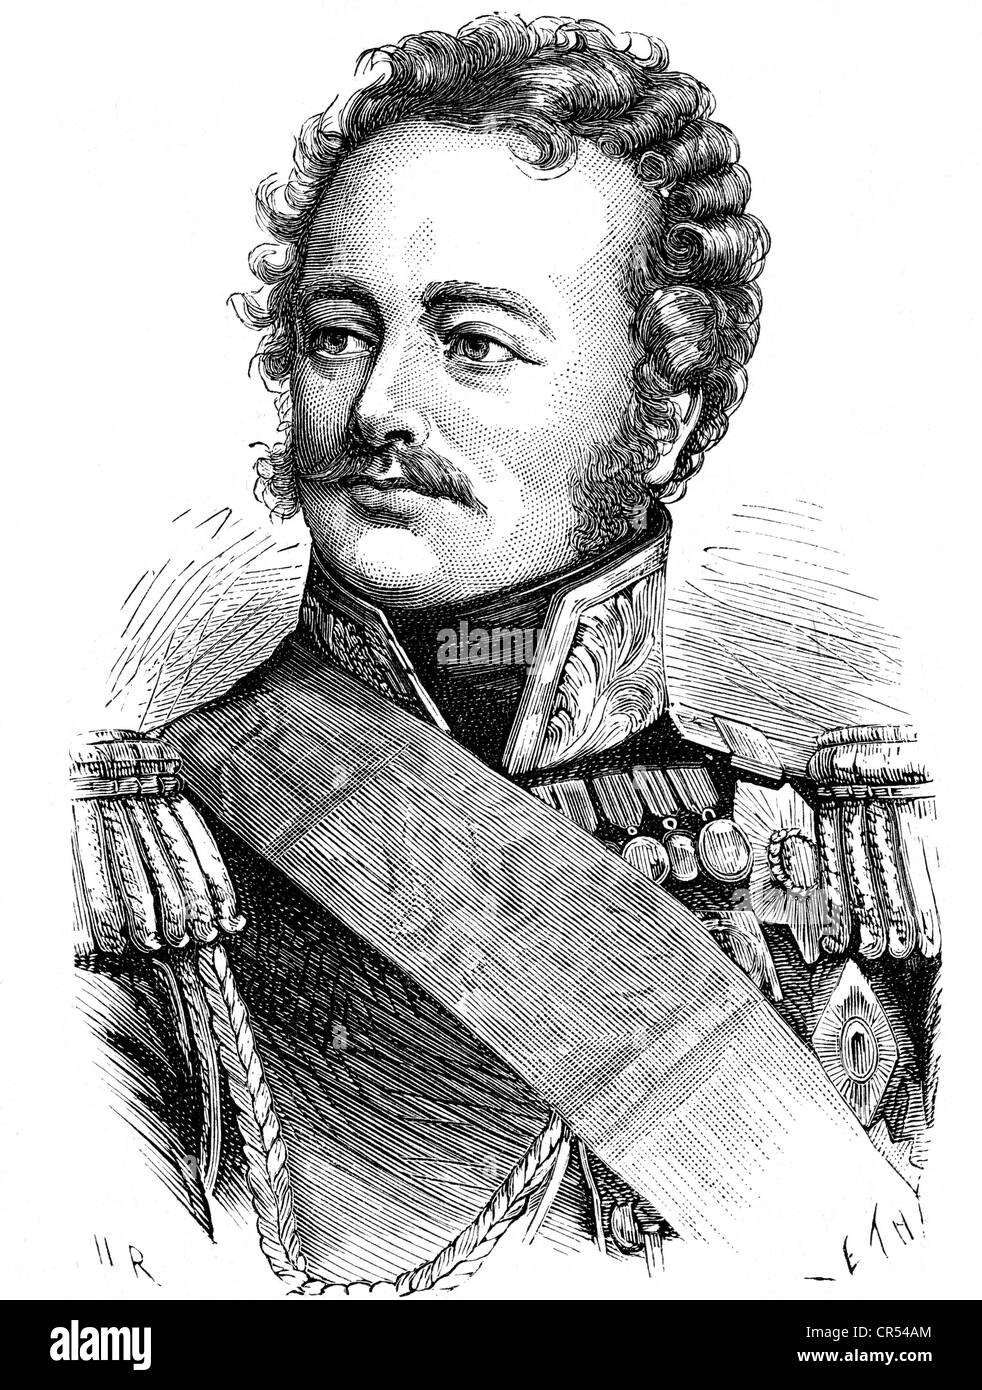 Paskevich, Ivan, 19.5.1782 - 1.2.1856, Russian general, governor of Poland since 1831, portrait in uniform, wood engraving, 19th century, Stock Photo